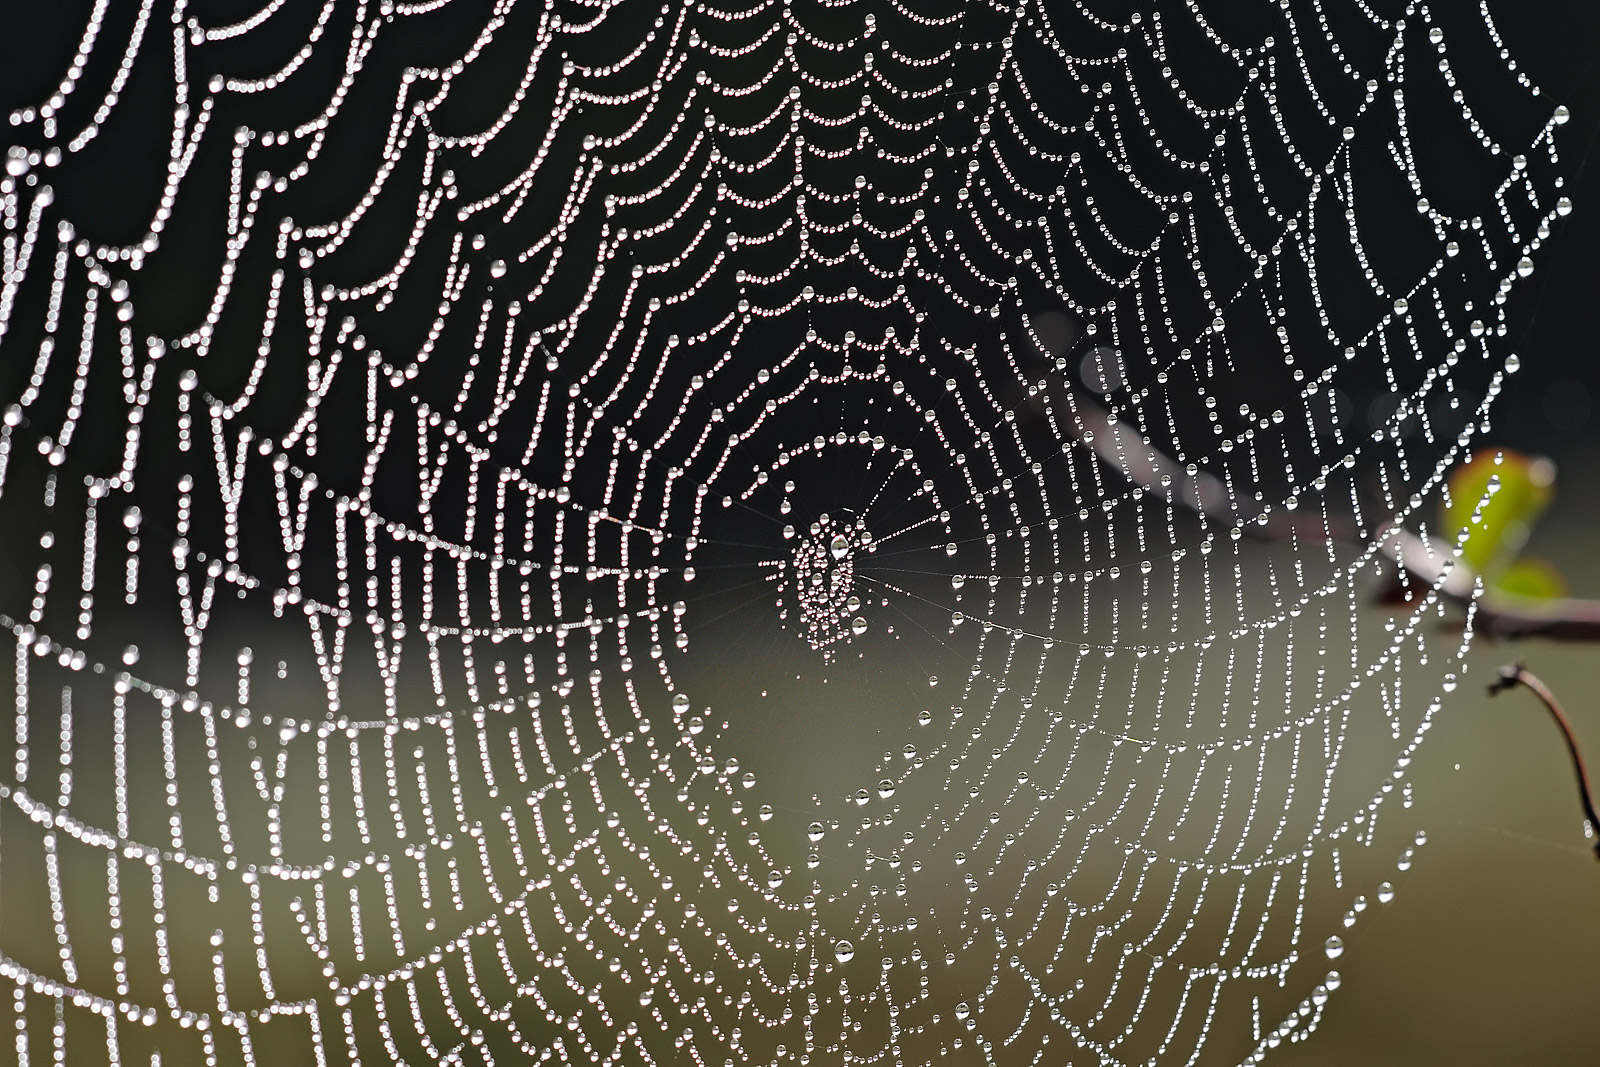 File Spider Web With Dew Drops04 jpg Wikimedia Commons